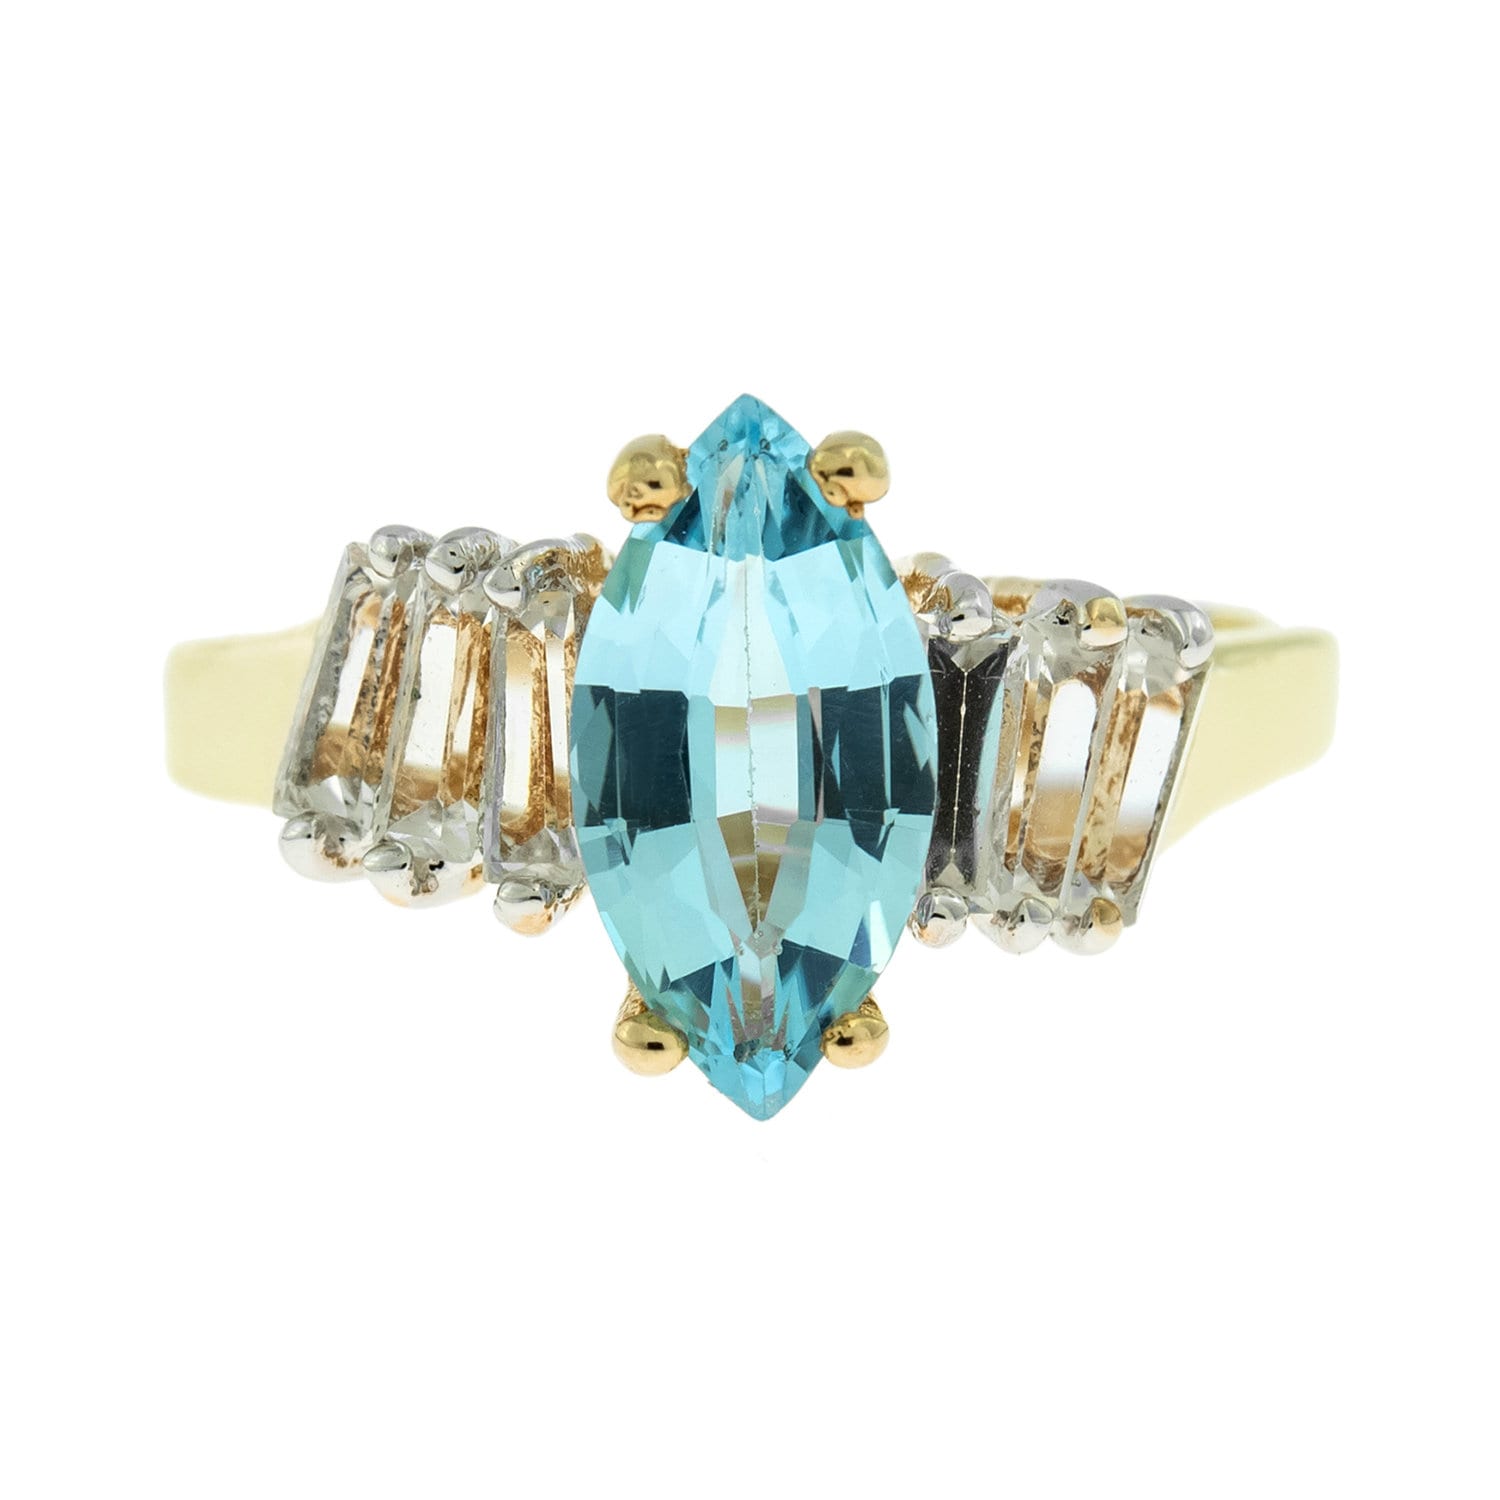 Vintage Ring Genuine Blue Topaz and Clear Swarovski Crystals 18kt Gold Plated R2604 - Limited Stock - Never Worn